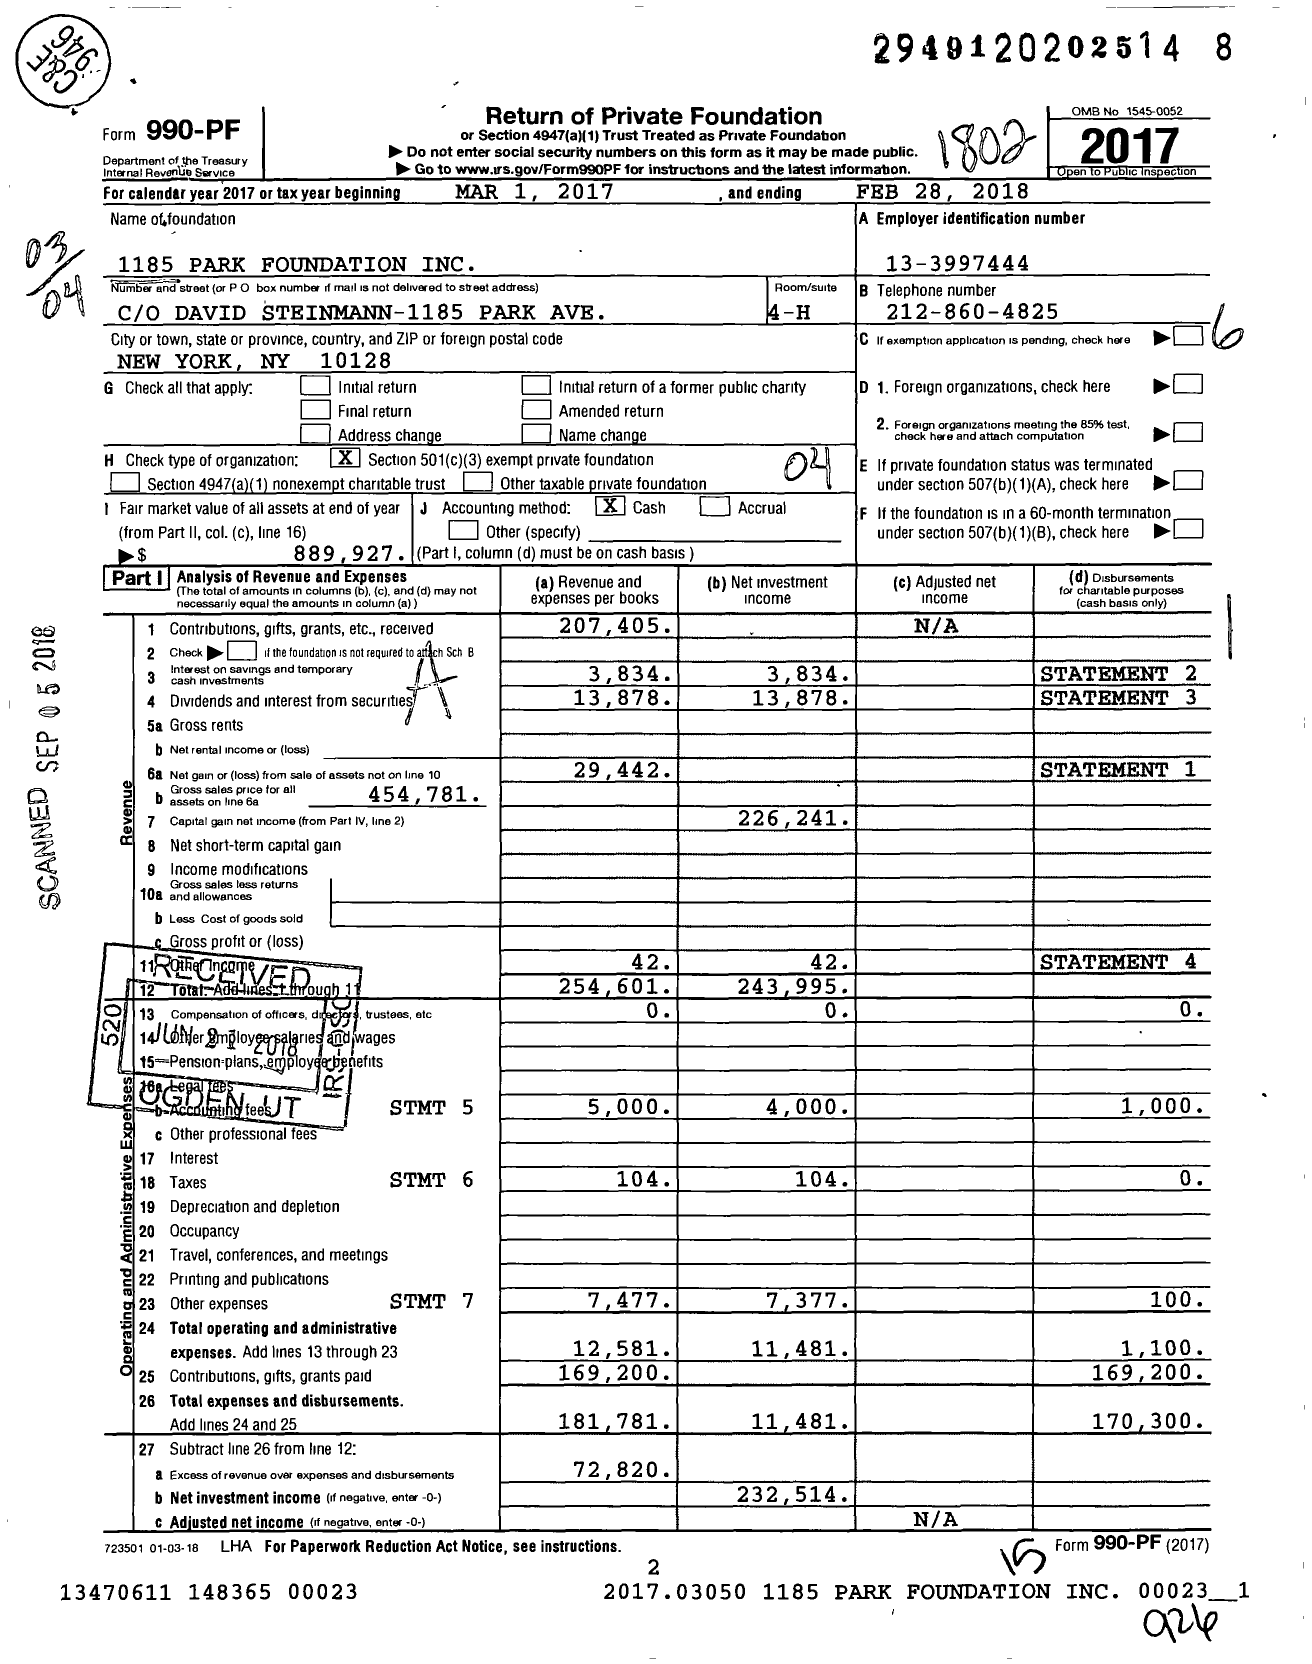 Image of first page of 2017 Form 990PF for 1185 Park Foundation